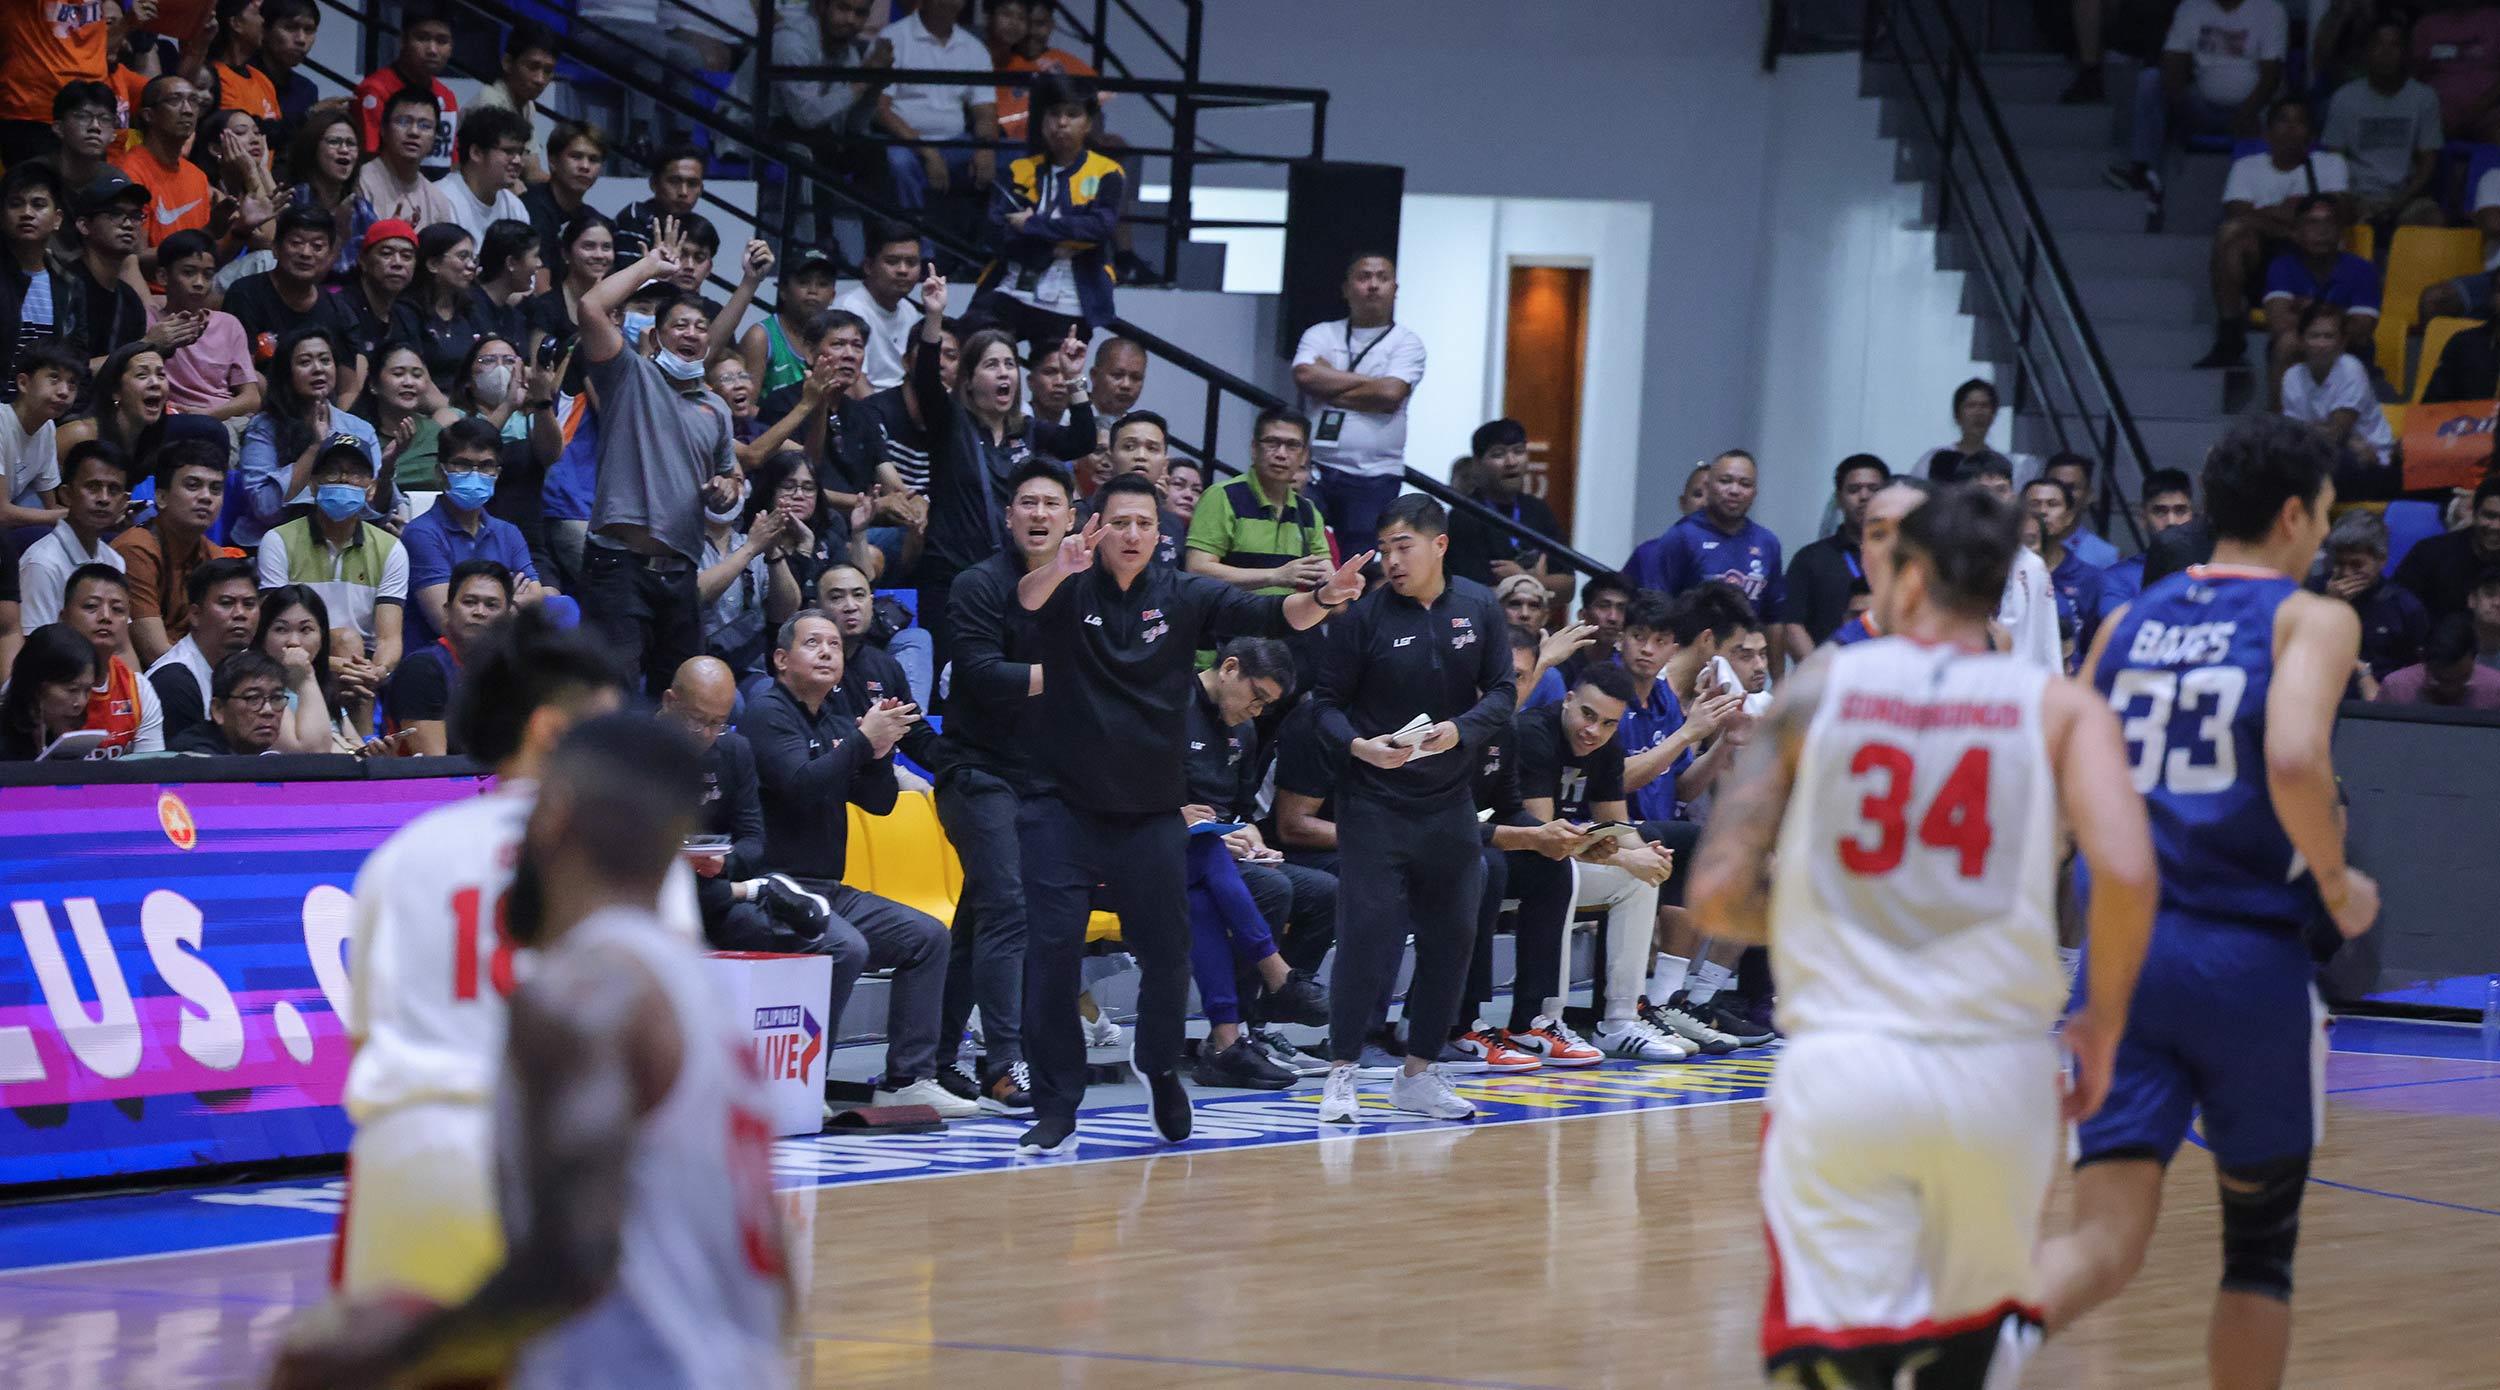 Meralco Bolts' coach Luigi Trillo during Game 7 of the PBA Philippine Cup semifinals against GInebra Gin KIngs.